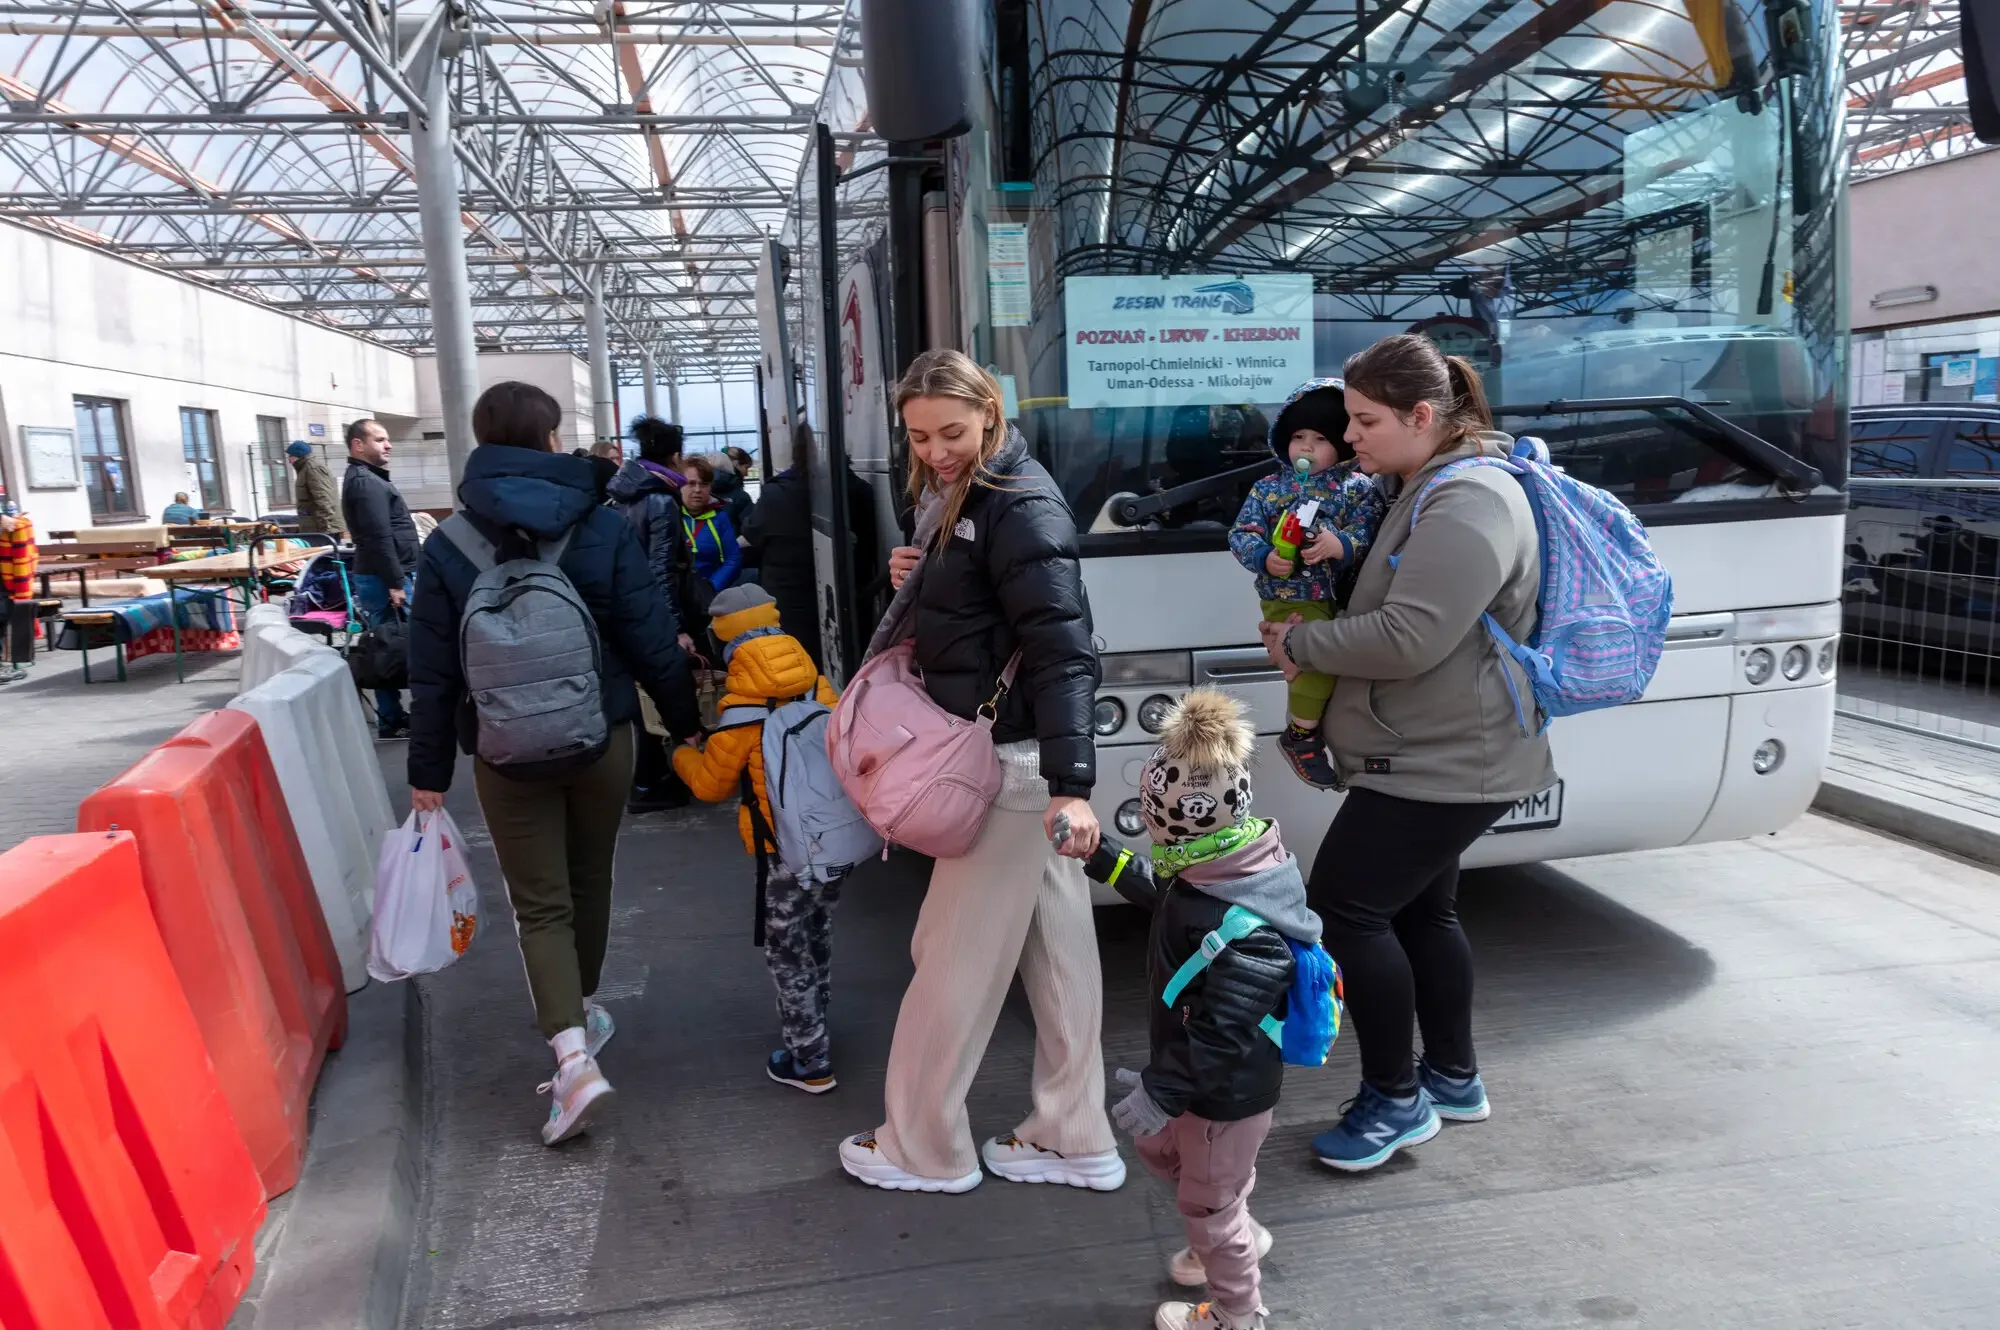 Ukrainian refugees, including Valeria and her son Misha, cross the border into Poland near the town of Hrebenne. In the border zone between Ukraine and Poland, refugees that cross on buses must pass through a checkpoint with their luggage.